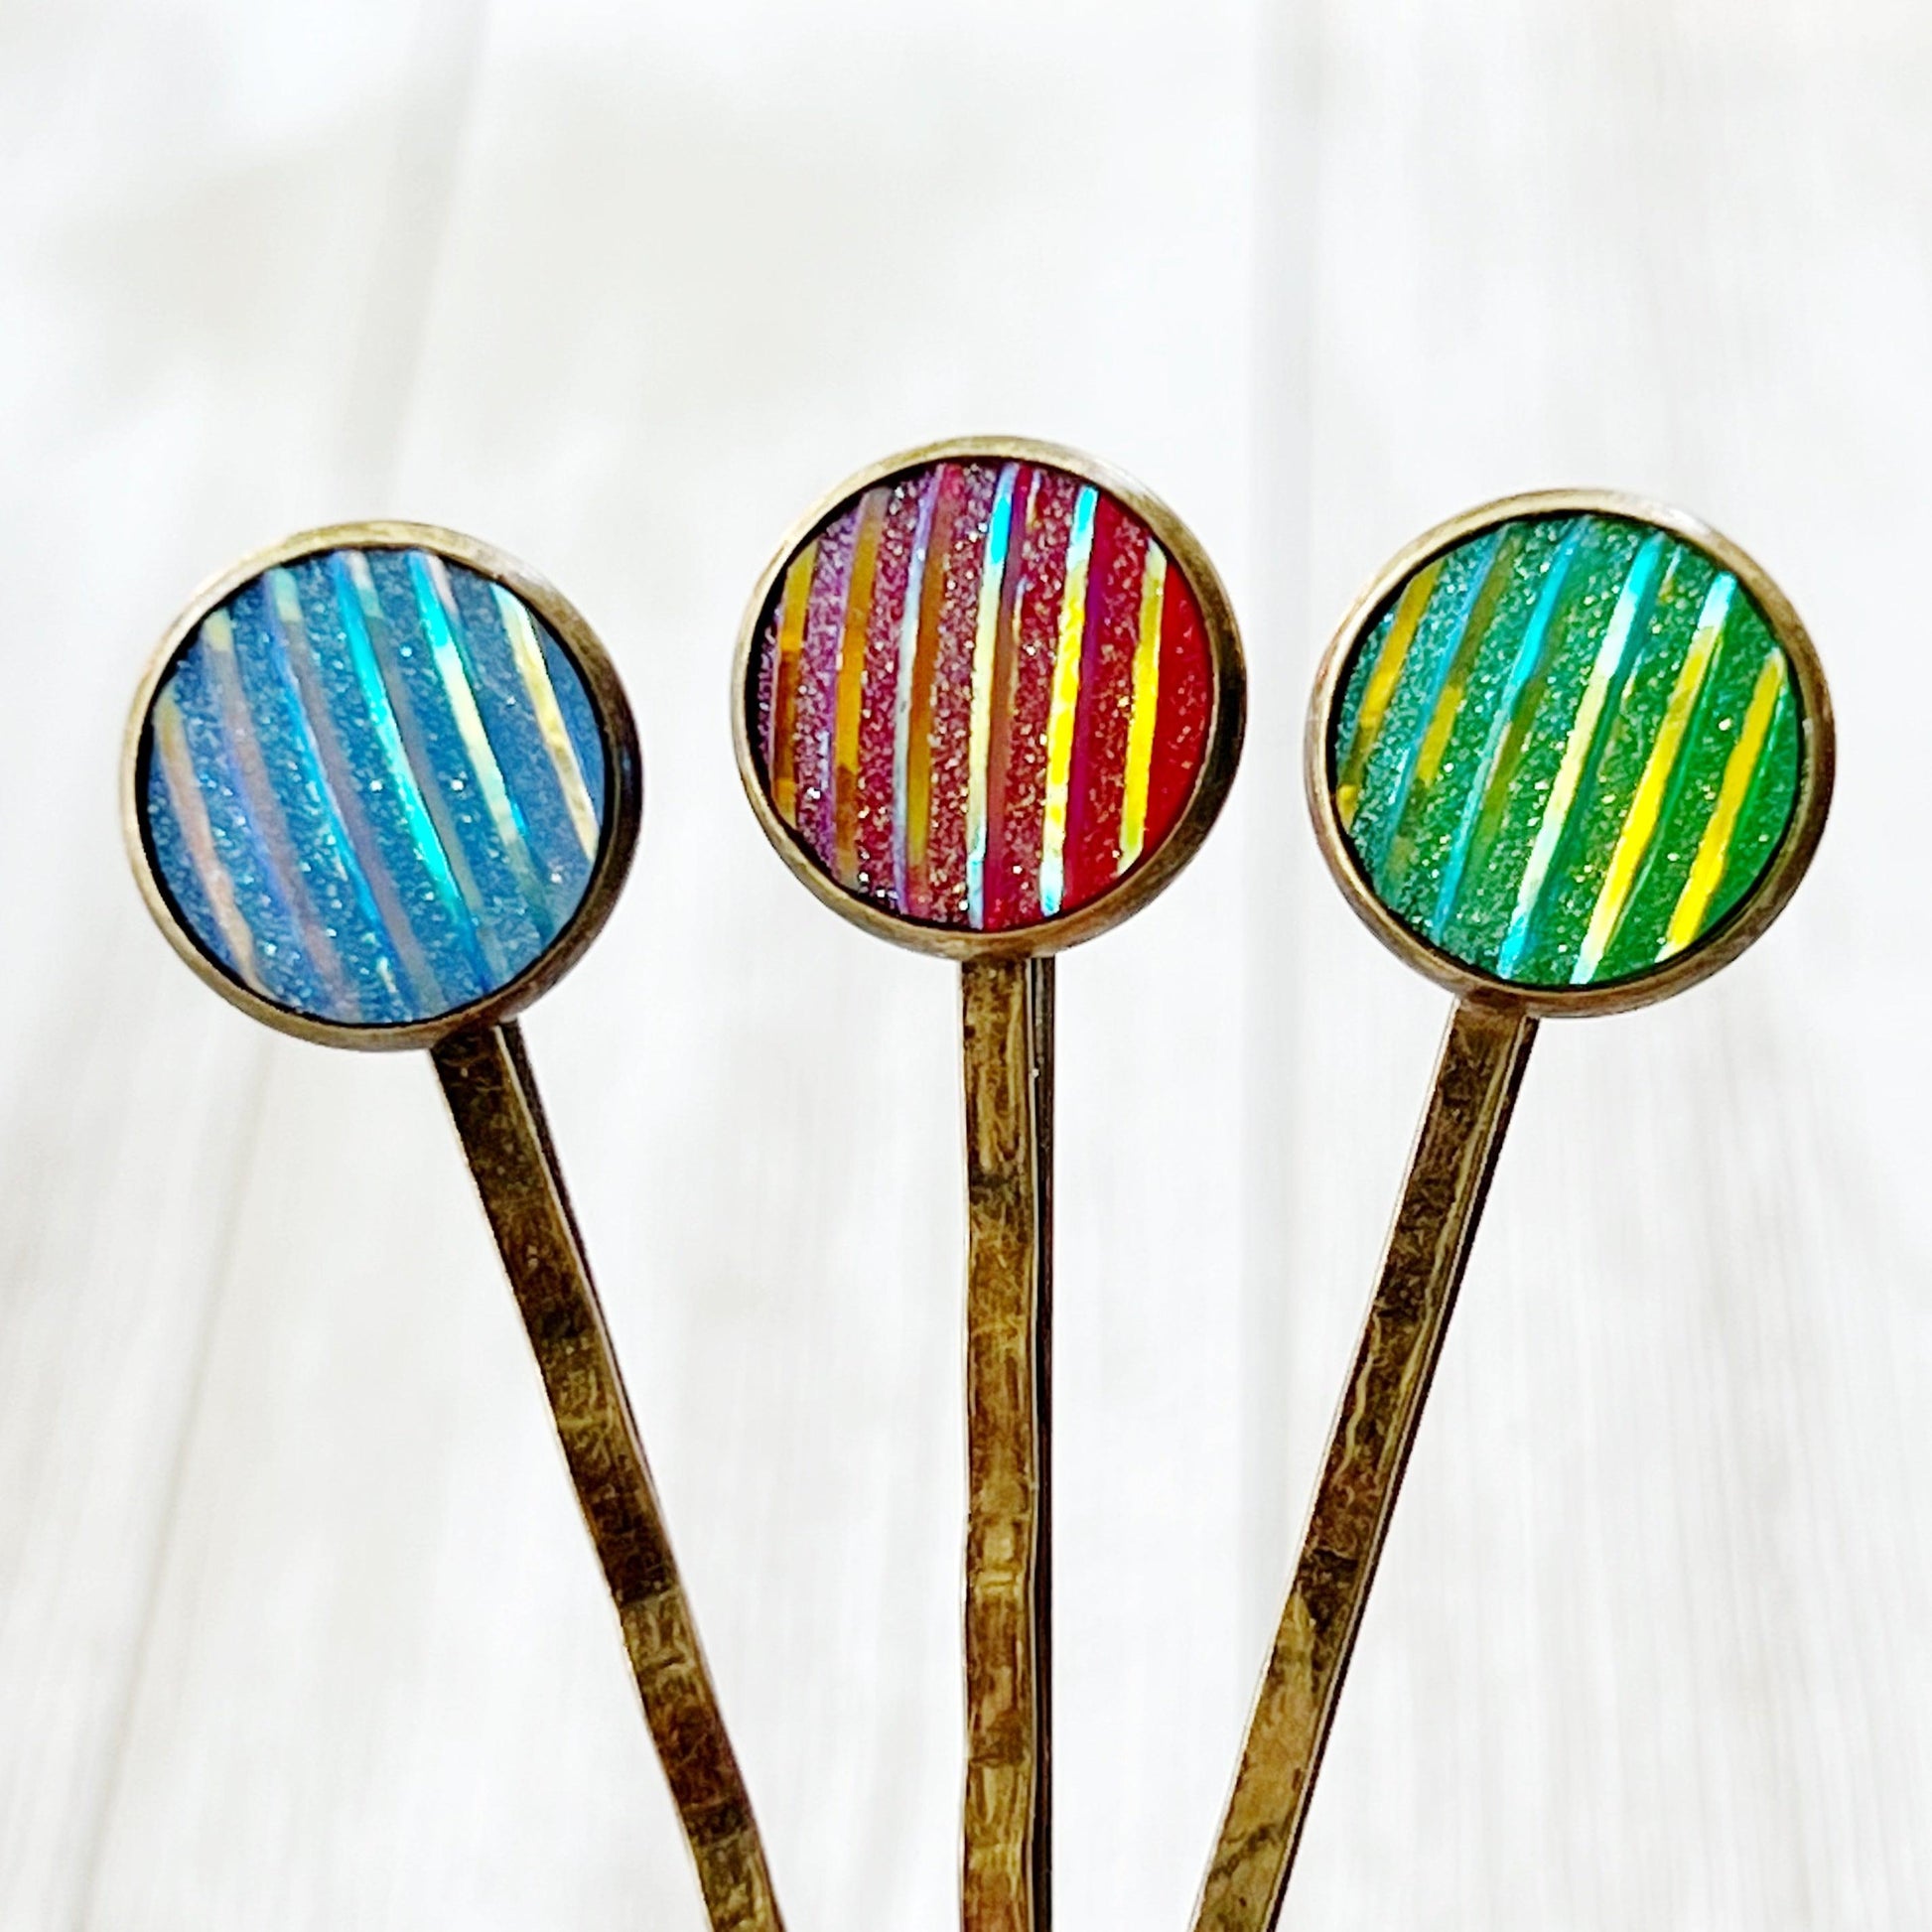 Green, Red, & Blue Striped Glitter Brass Hair Pins Set of 3- Sparkling & Colorful Hair Accessories